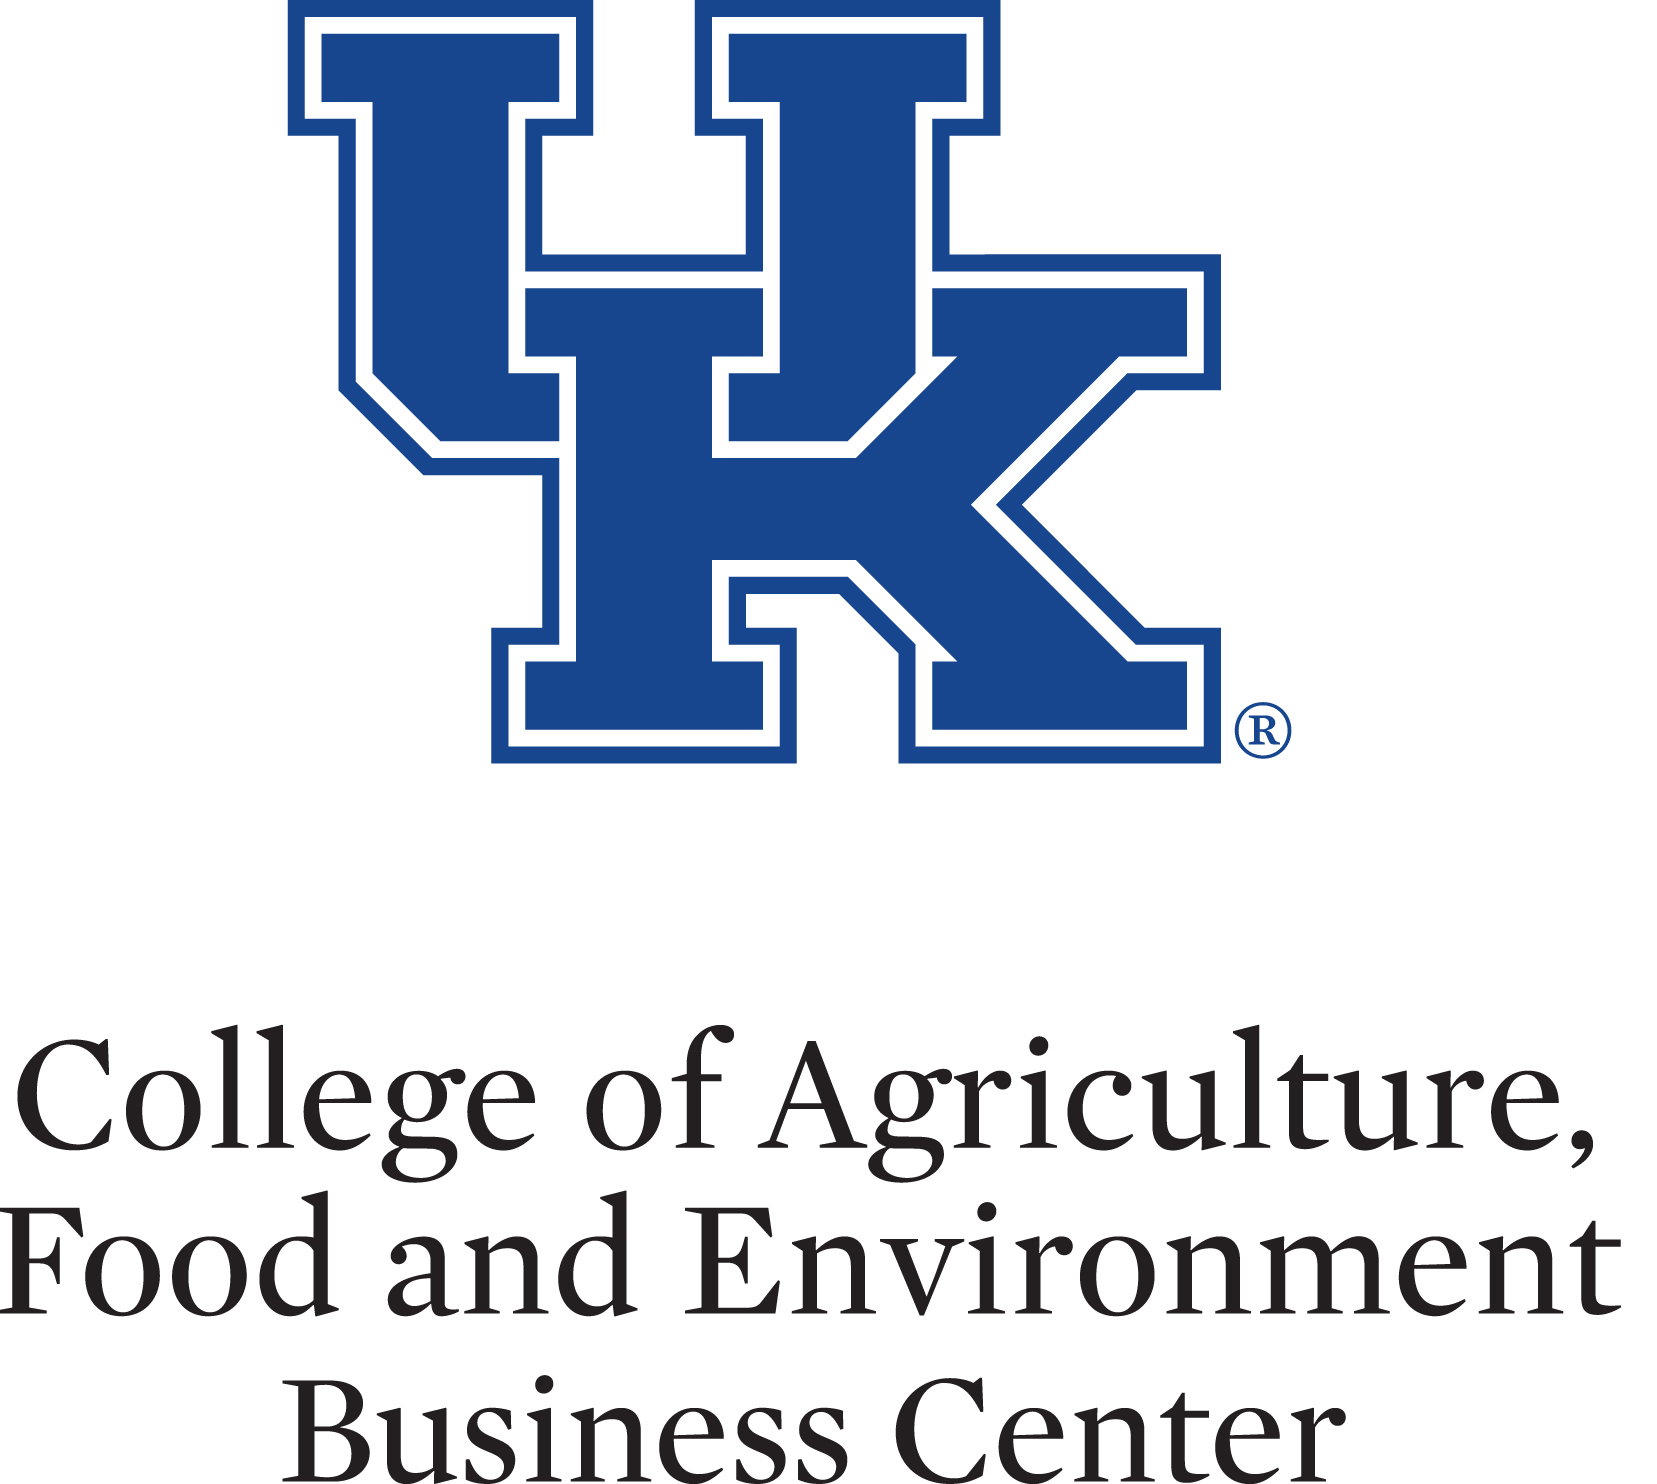 College of Agriculture, Food and Environment Business Center Logo